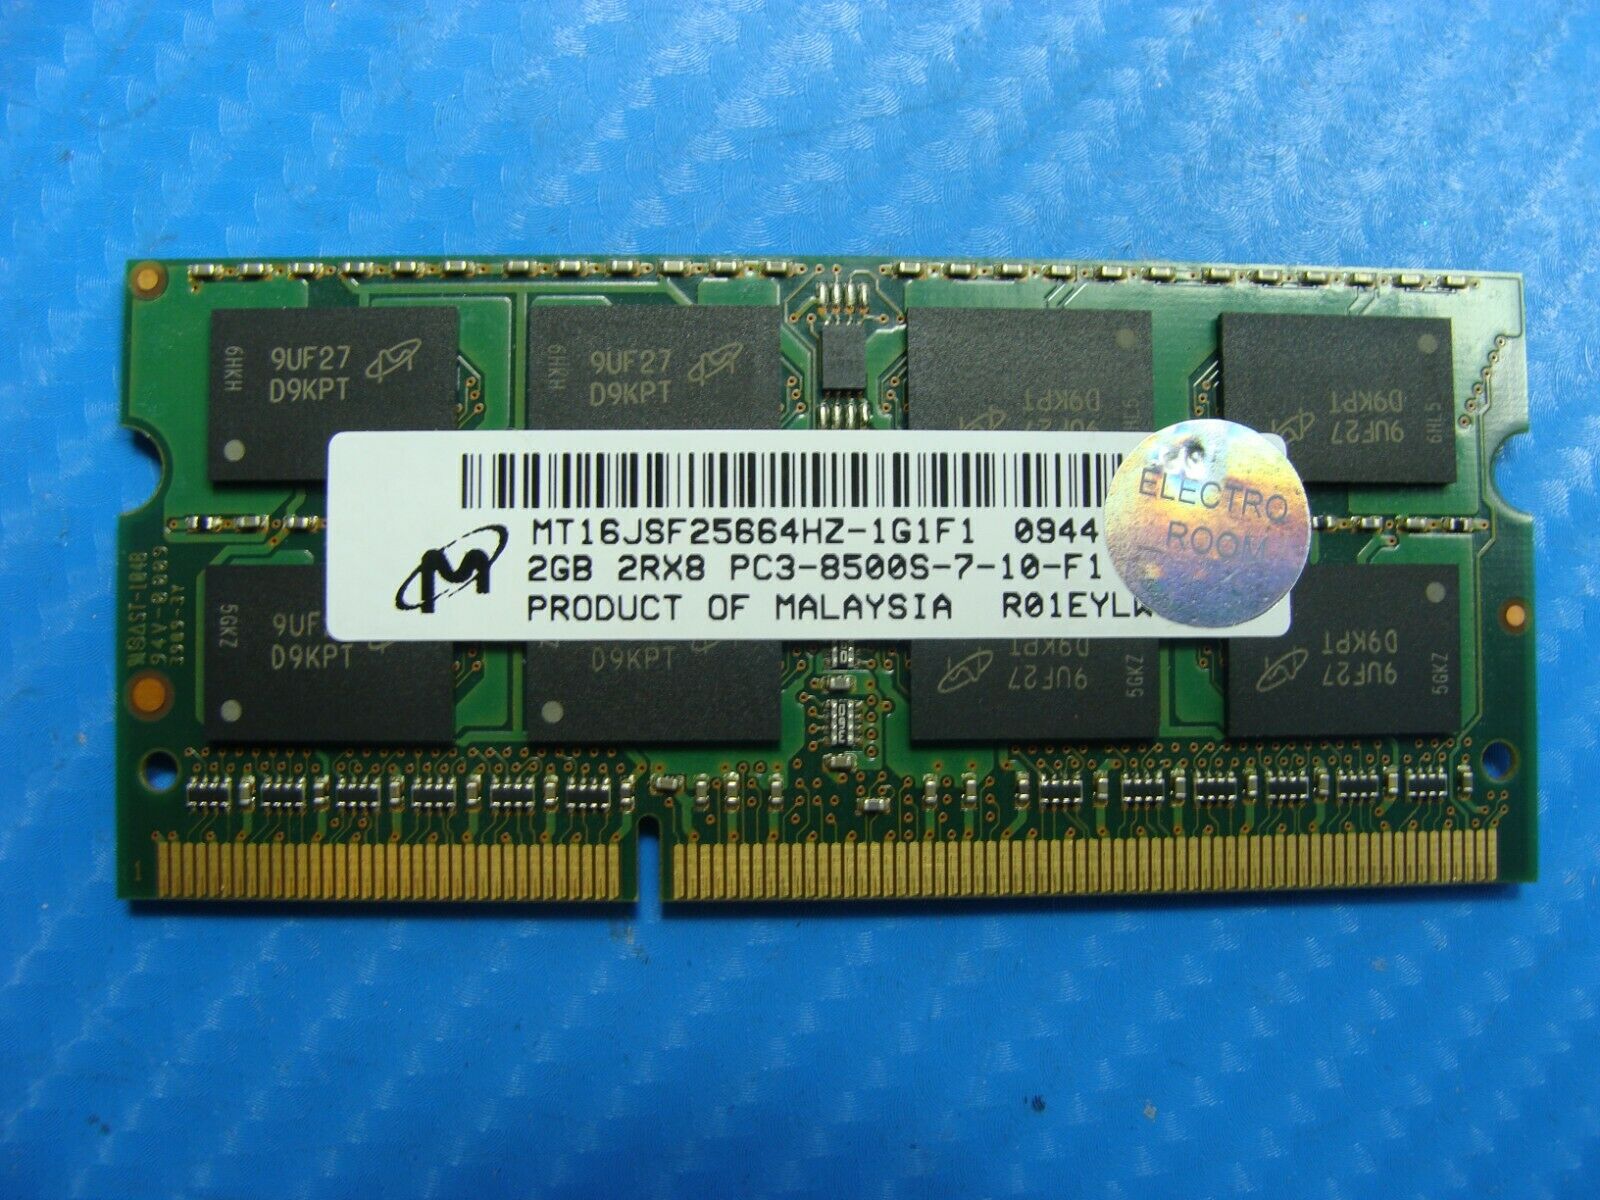 MacBook Pro A1278 Micron 2GB PC3-8500S SO-DIMM Memory RAM MT16JSF25664HZ-1G1F1 - Laptop Parts - Buy Authentic Computer Parts - Top Seller Ebay